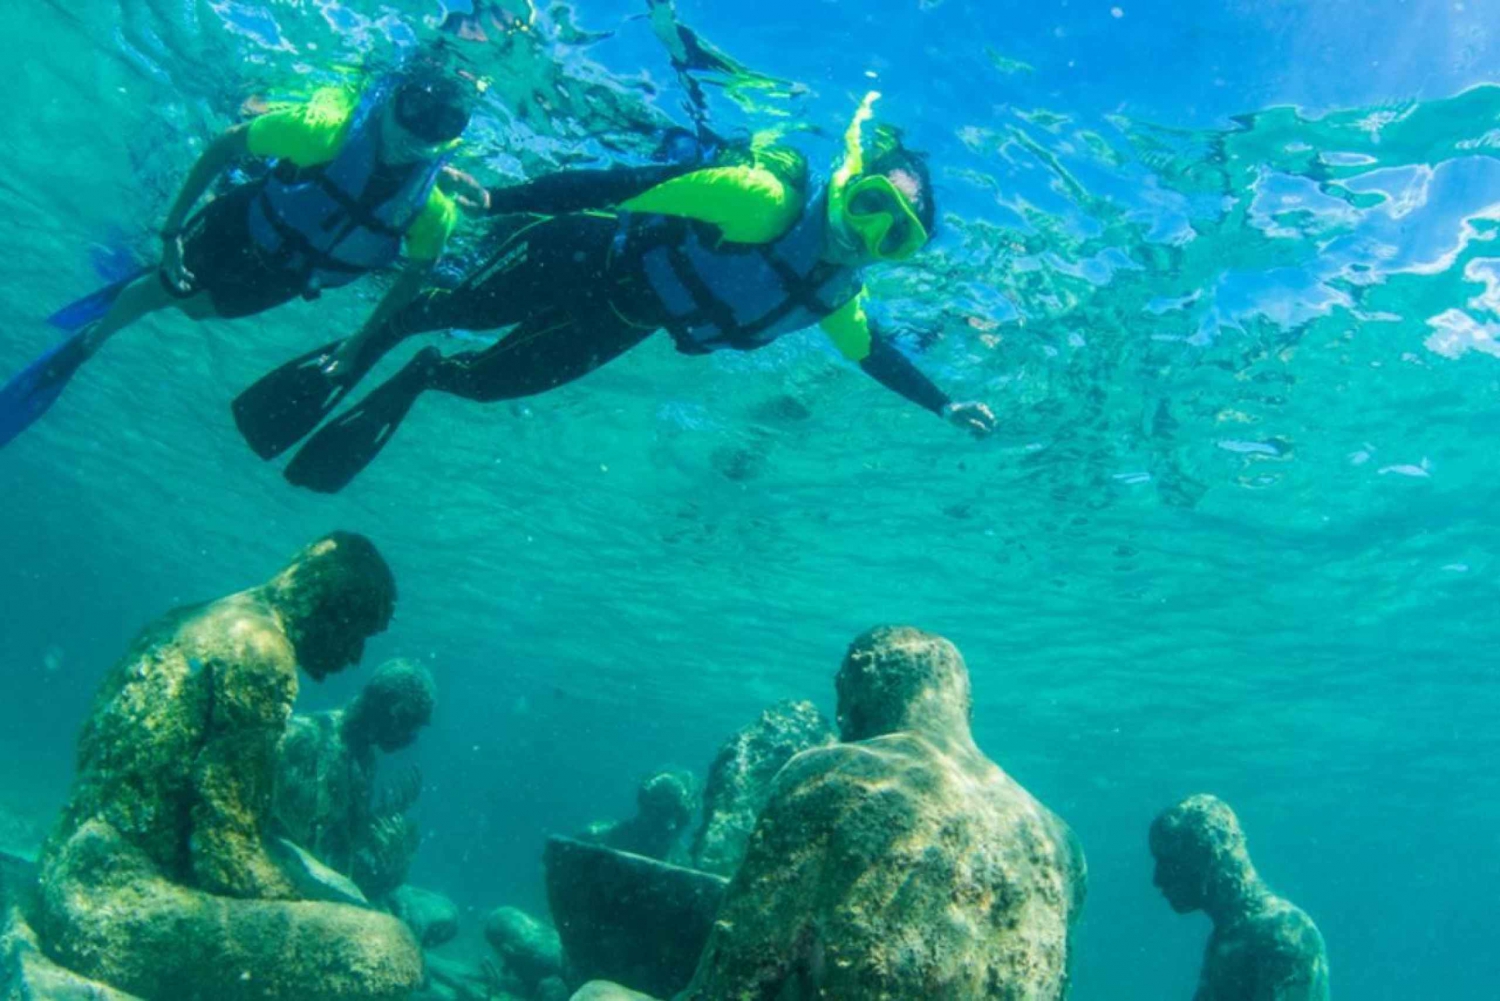 Cancun: Snorkeling Tour at MUSA The Underwater Museum